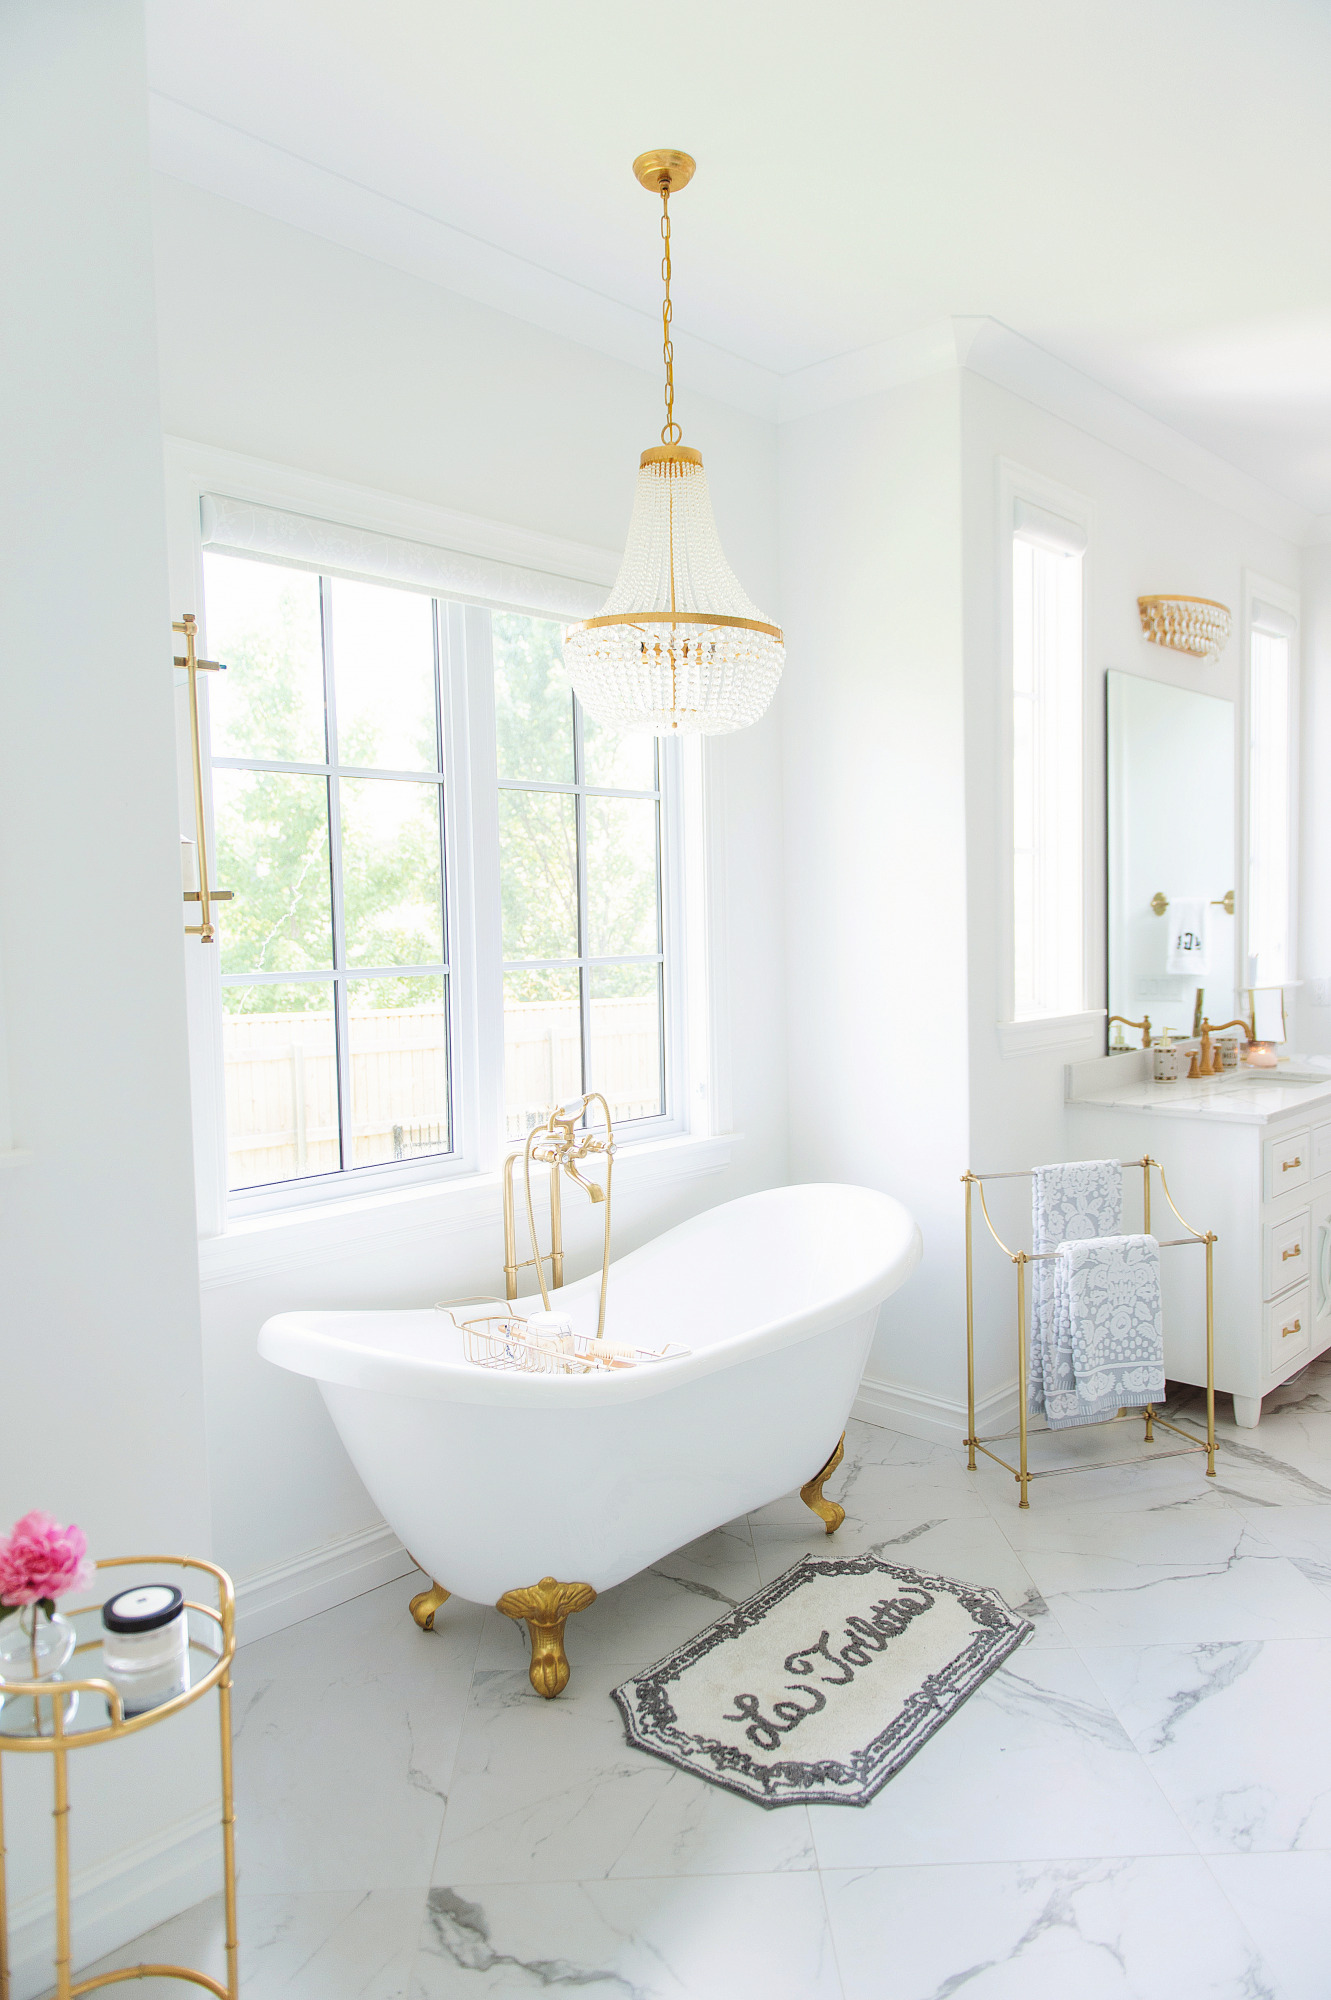 Blog Design by popular US lifestyle blog, The Sweetest Thing: image of a bathroom with a white and gold claw foot tub, chandelier, and white vanity. 